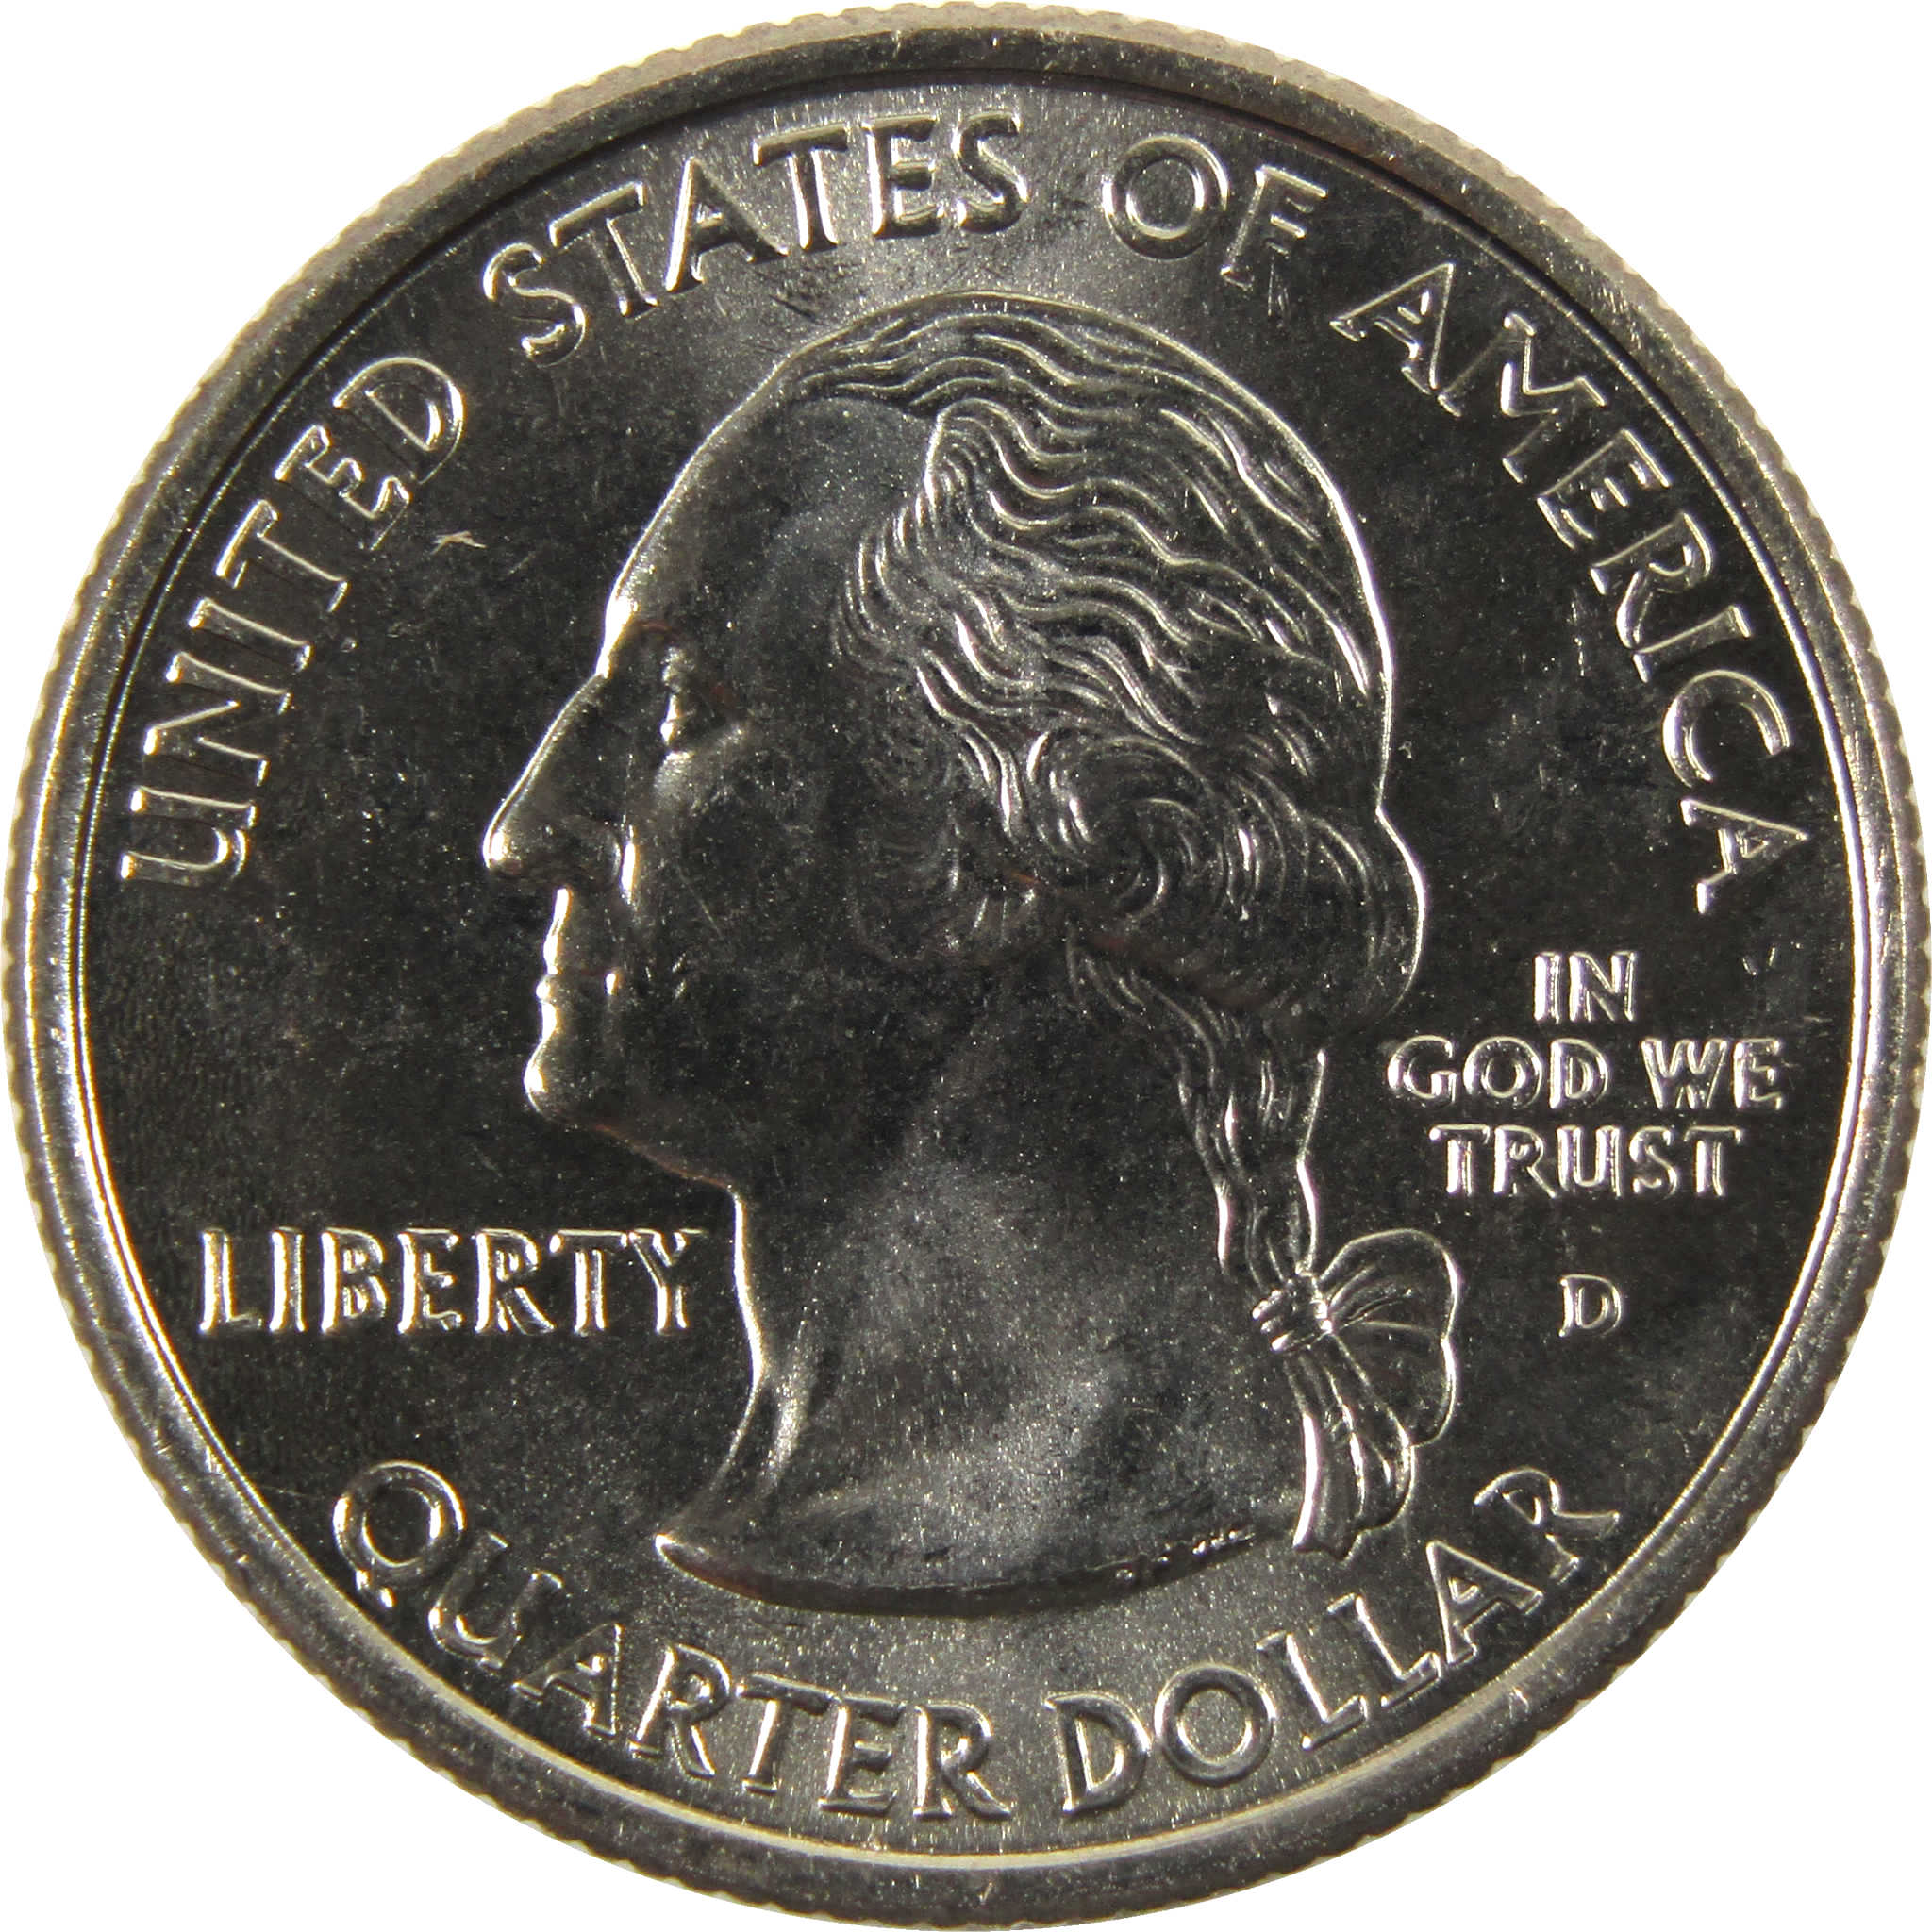 2008 D Oklahoma State Quarter BU Uncirculated Clad 25c Coin